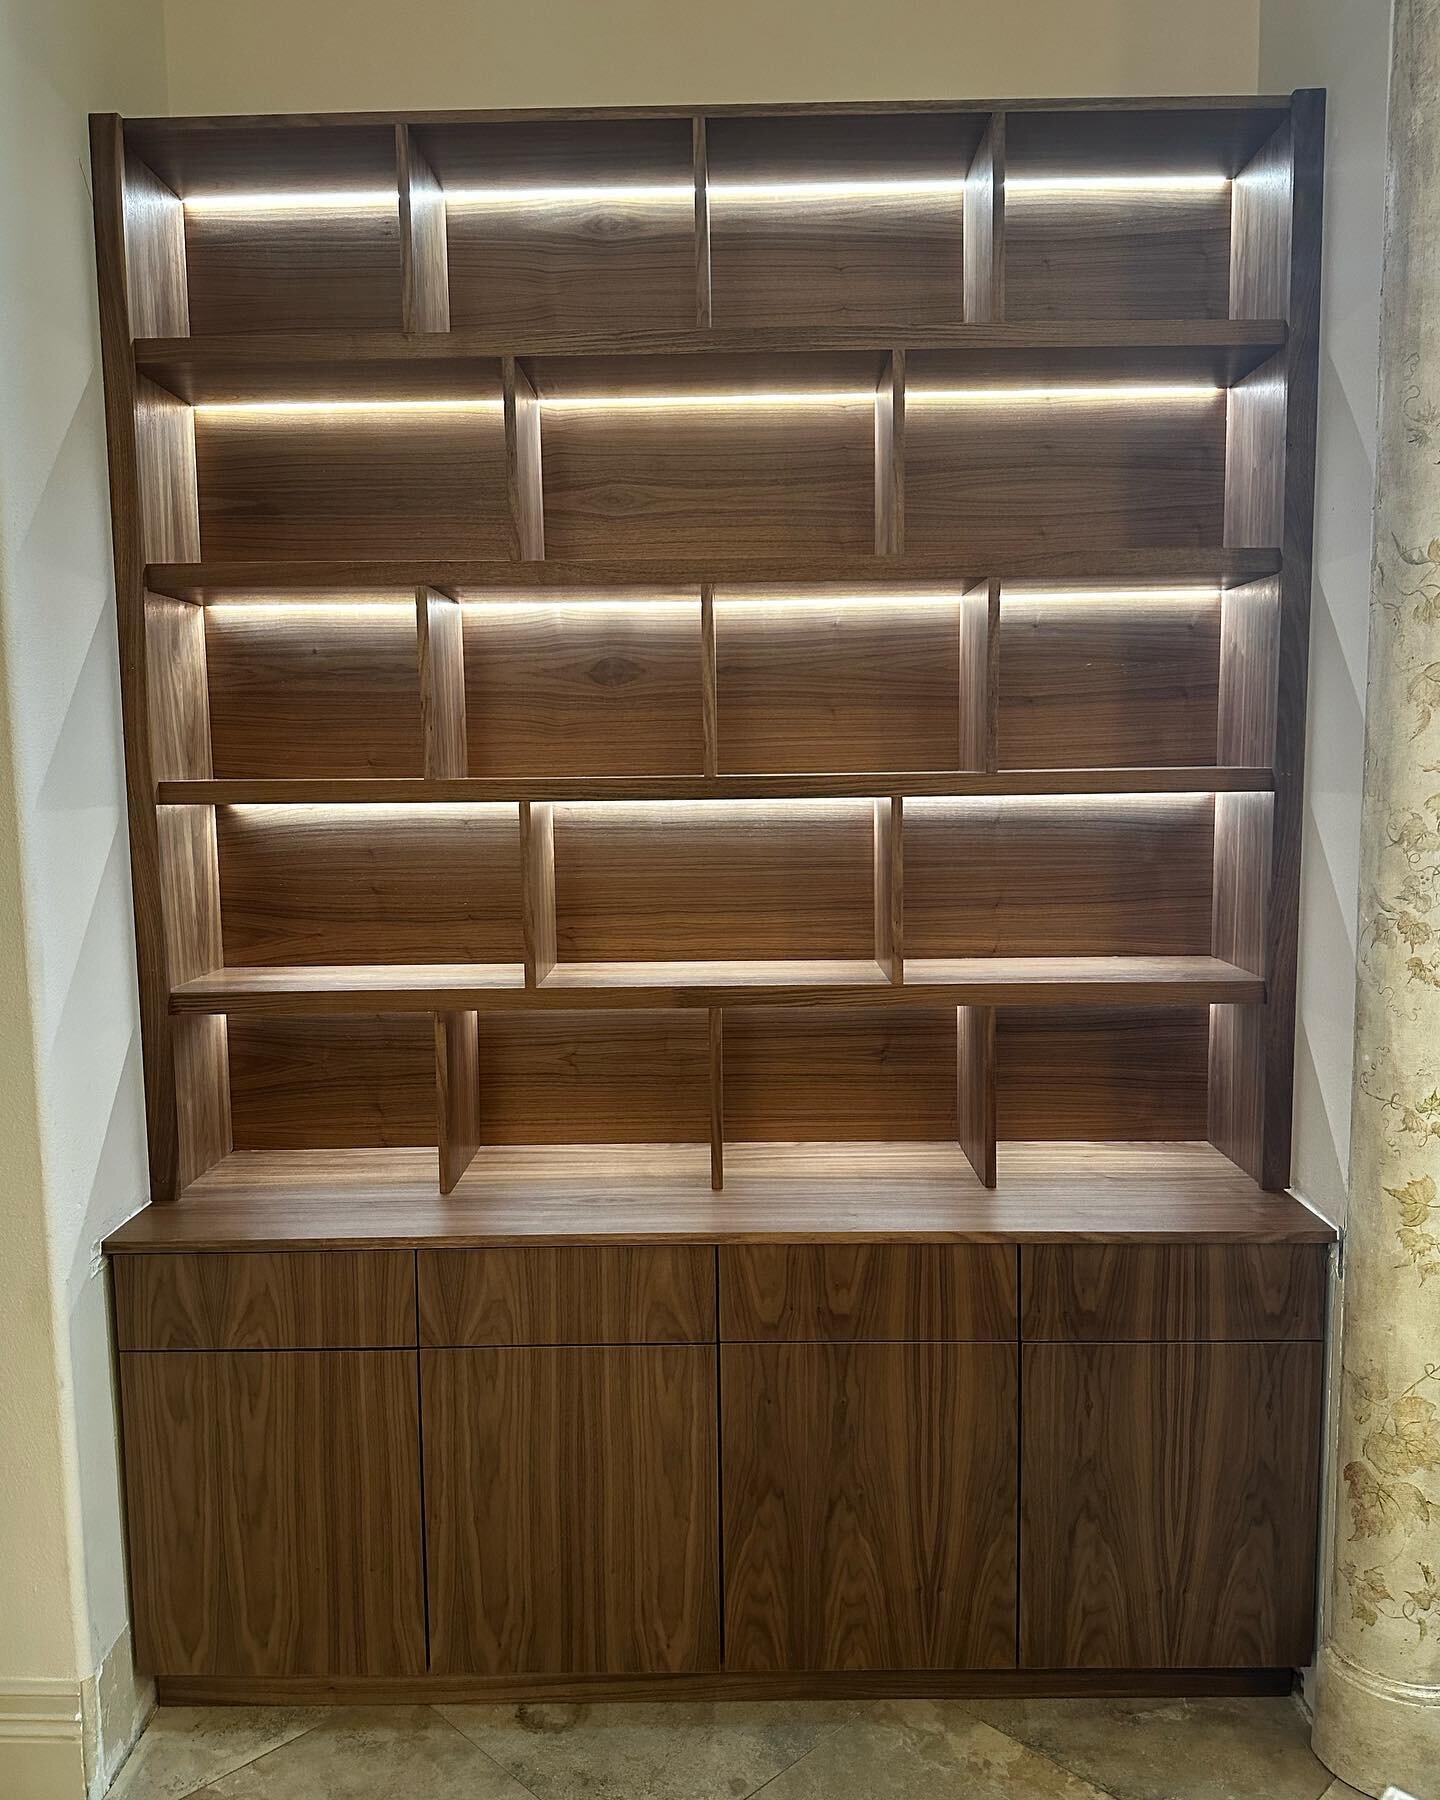 We&rsquo;re liking how this walnut built-in came out. Integrated LED lights on a dimmer, soft-close drawers with dovetailed Baltic Birch drawer boxes and lots of other little features that kept this project assembly and installation as painless as po